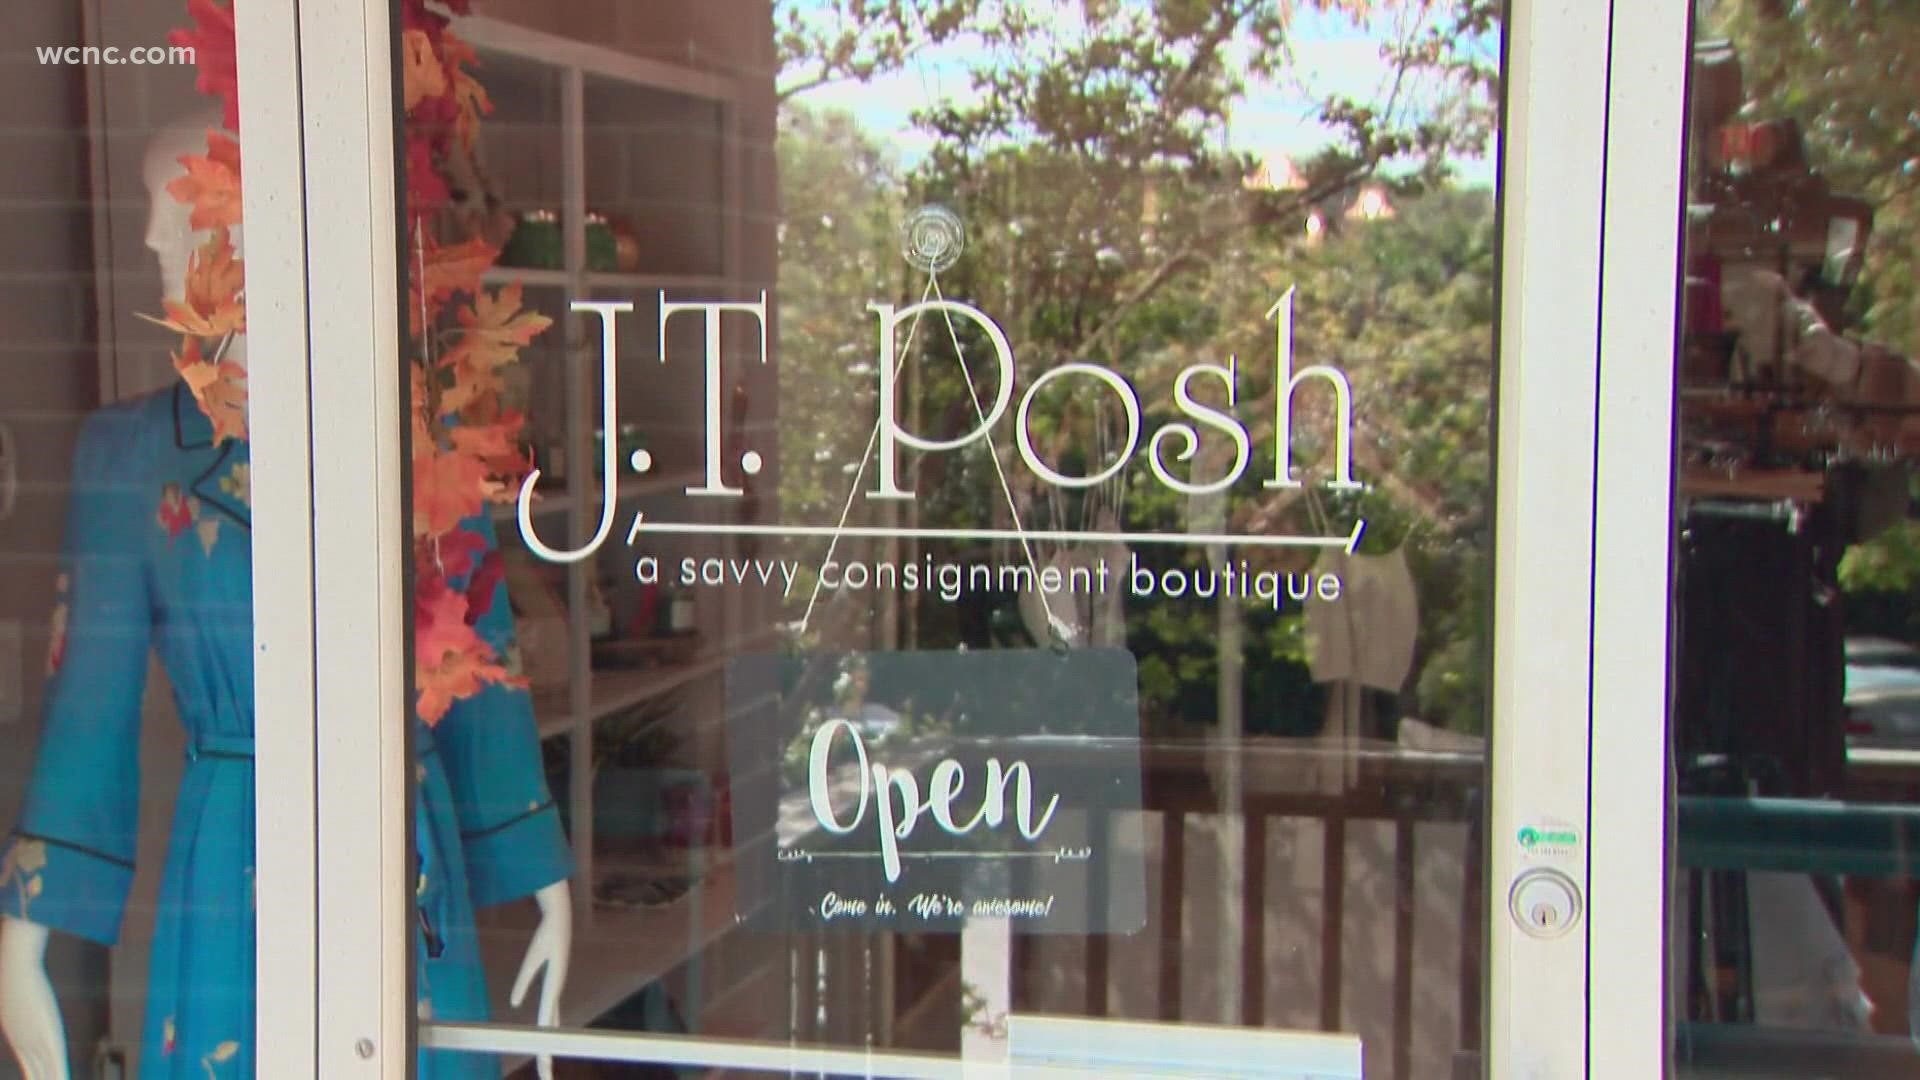 Business booming in high-end consignment shops